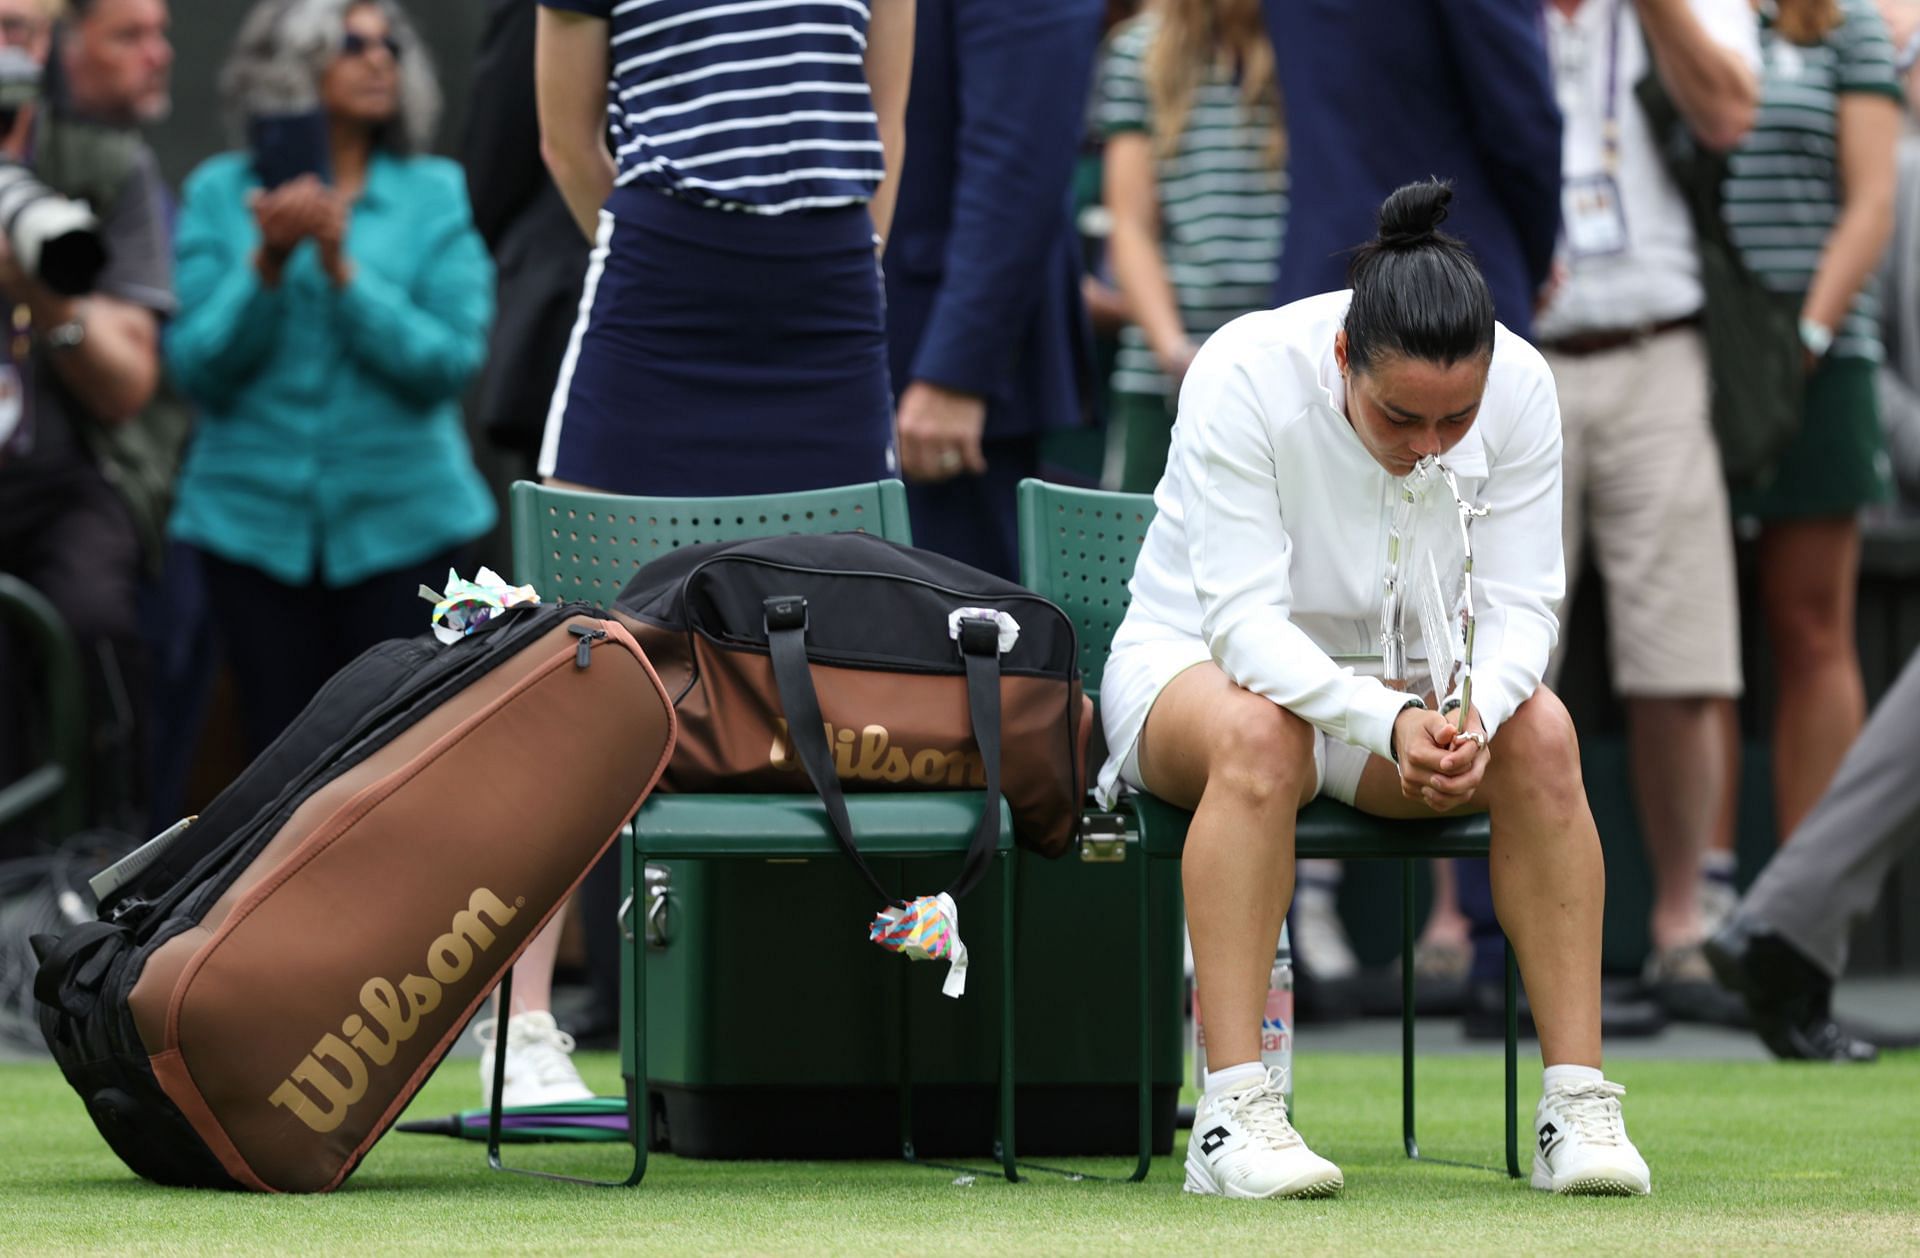 Ons Jabeur was inconsolable after her second successive loss in a Wimbledon final